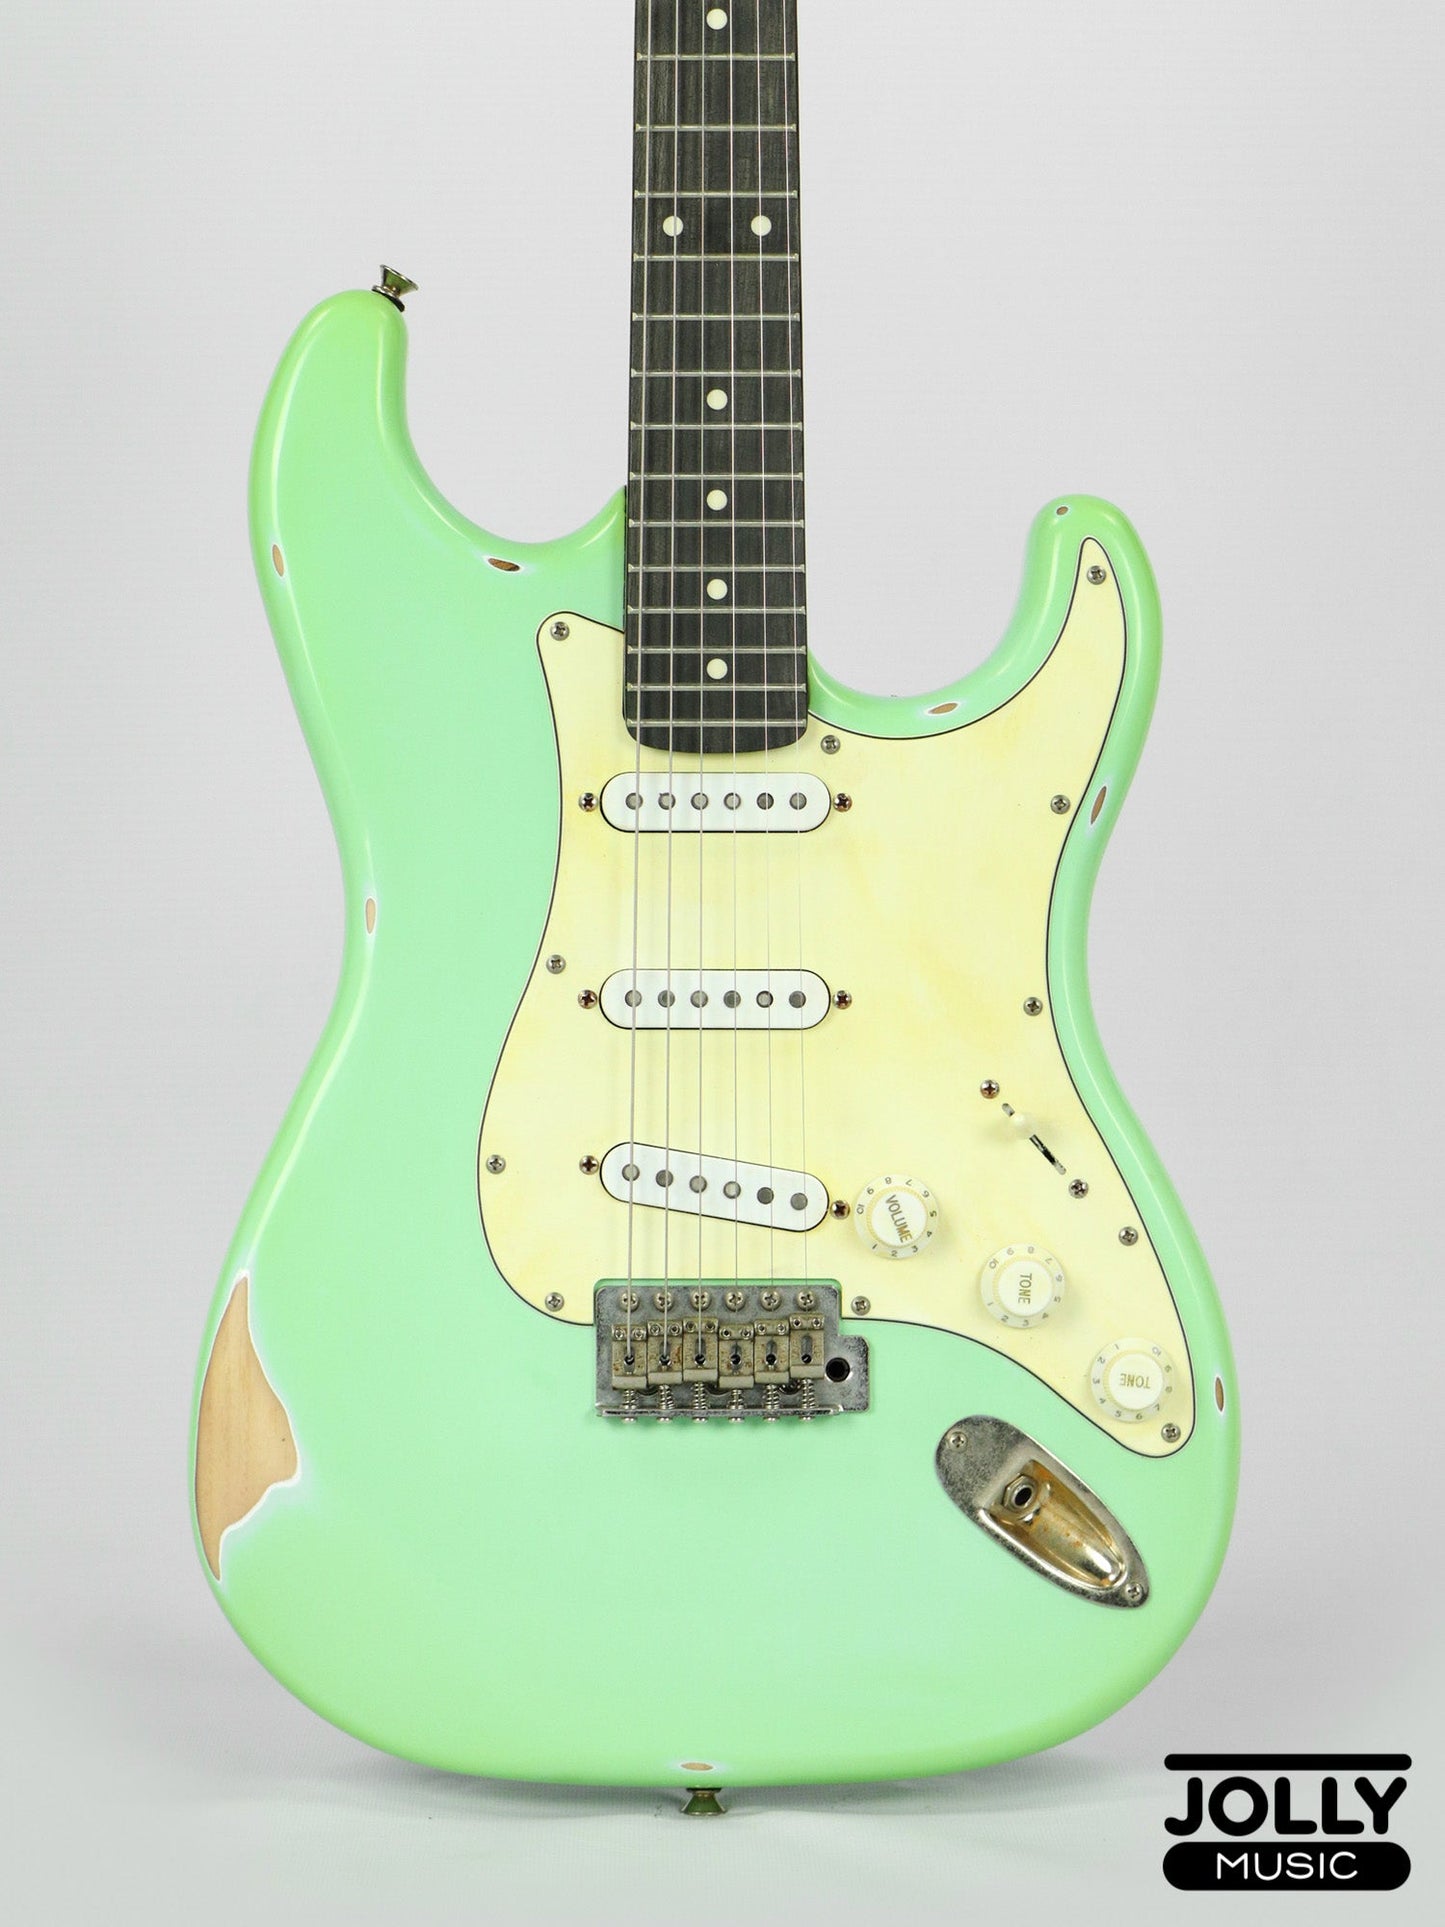 JCraft Vintage Series S-3VC Antique S-Style Electric Guitar Relic - Surf Green